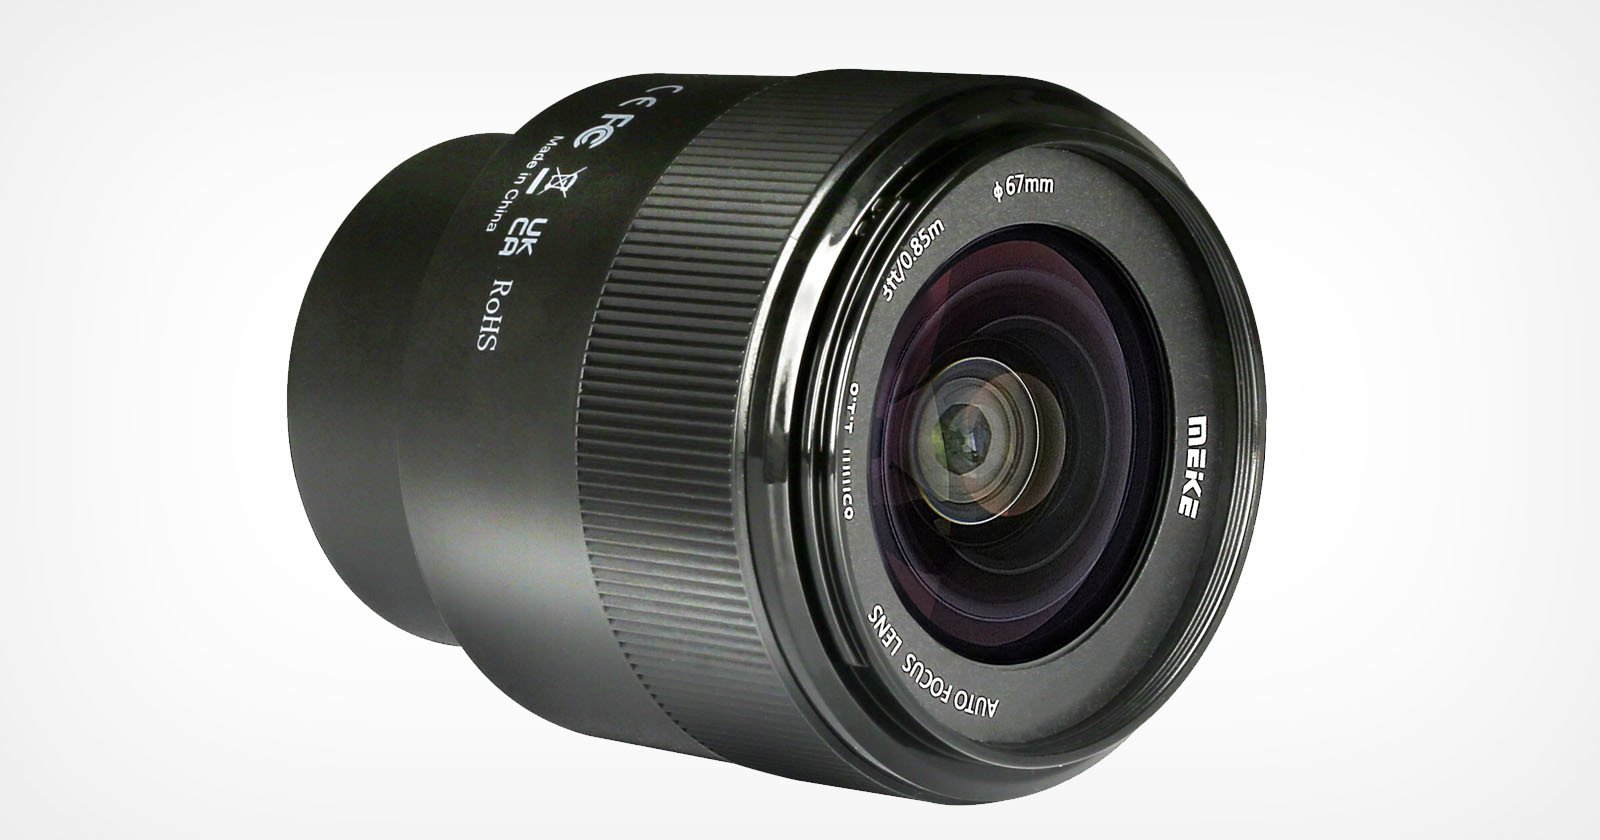 Meike Launches $200 85mm f/1.8 AF Lens for Sony Full Frame Cameras